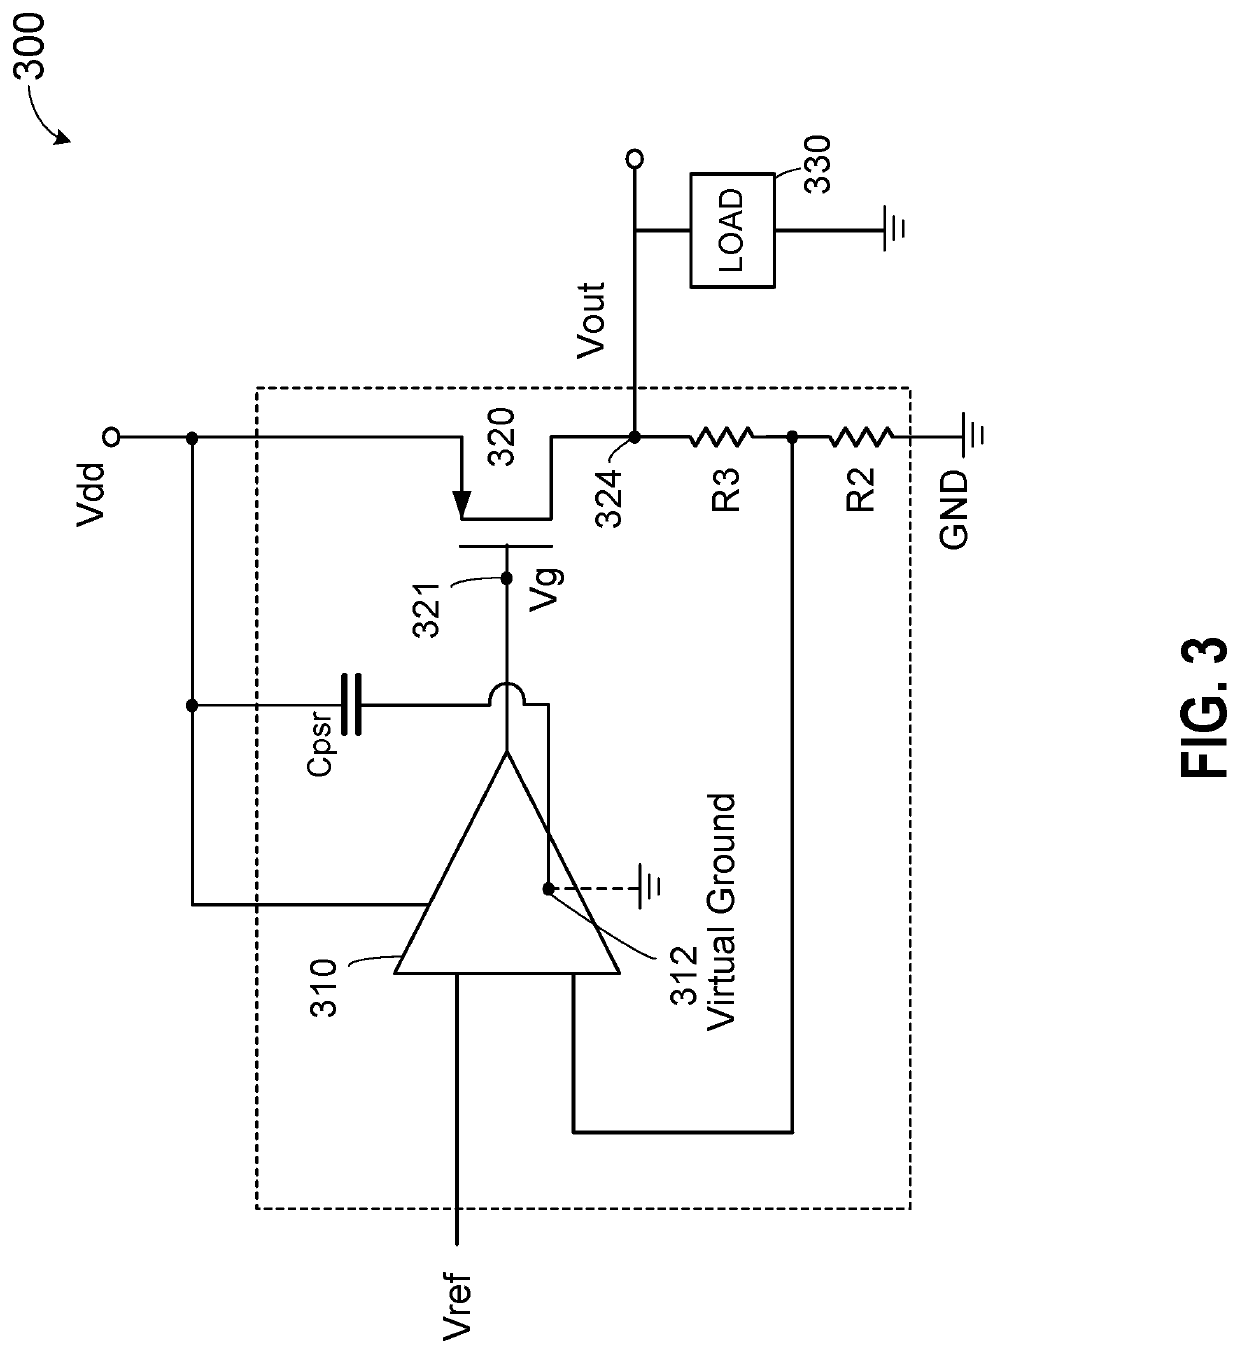 Voltage regulator circuit with high power supply rejection ratio